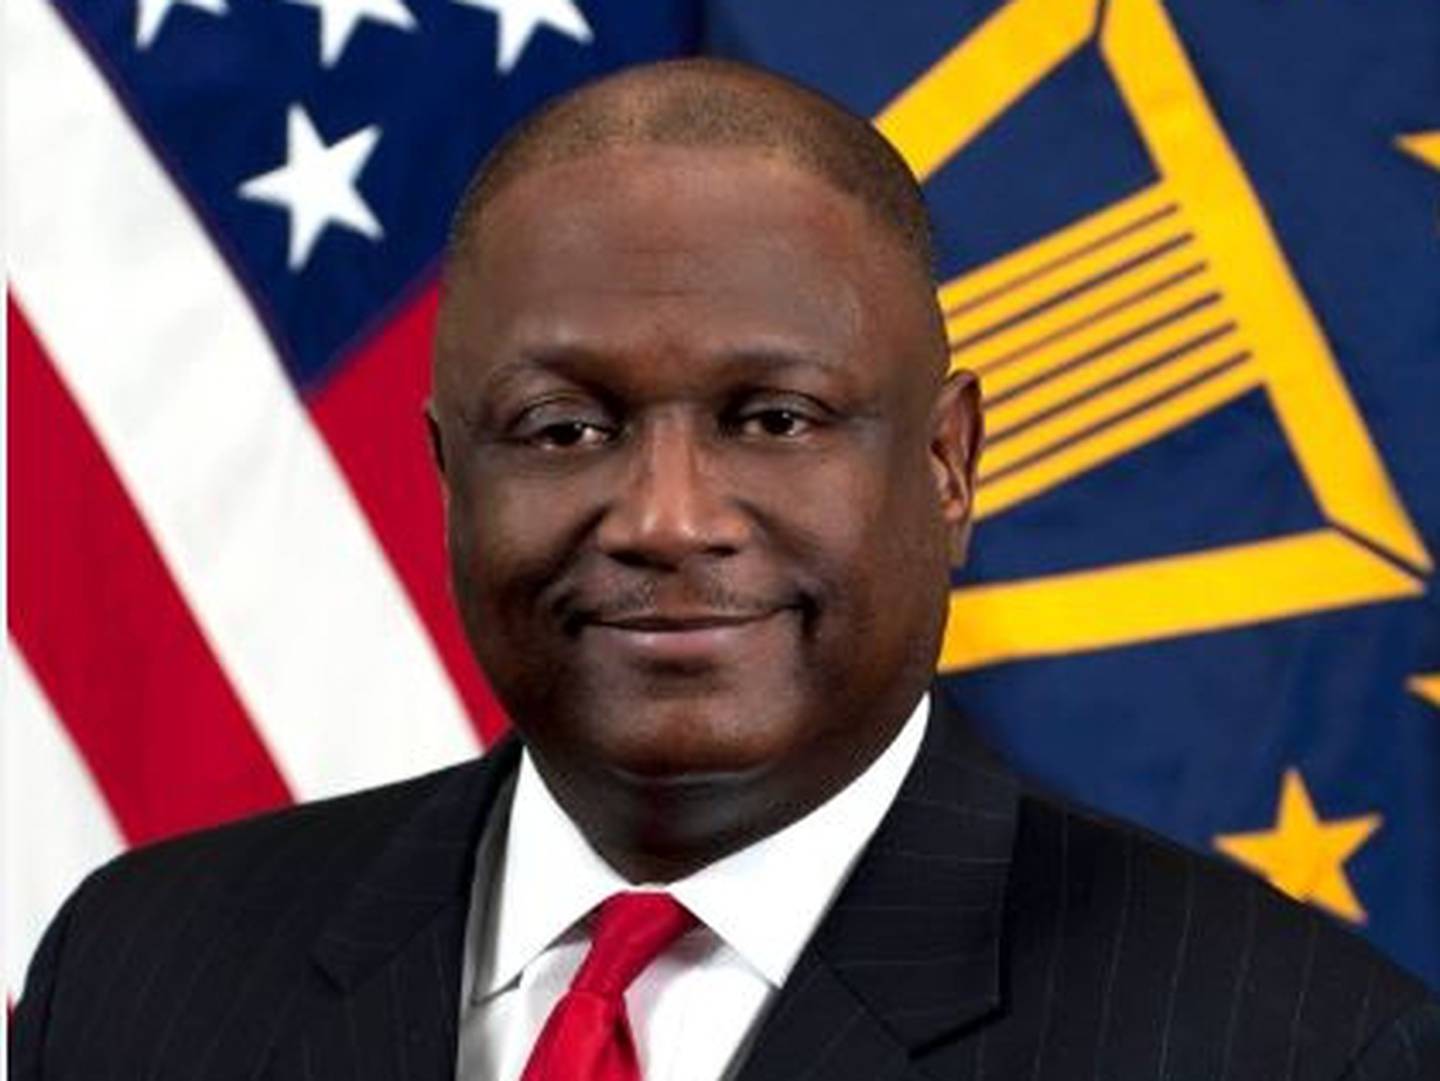 Frederick D. Moorefield Jr., who served as deputy chief information officer for command, control, and communications, for the Office of the Secretary of Defense, has been charged with facilitating a dog fighting ring.